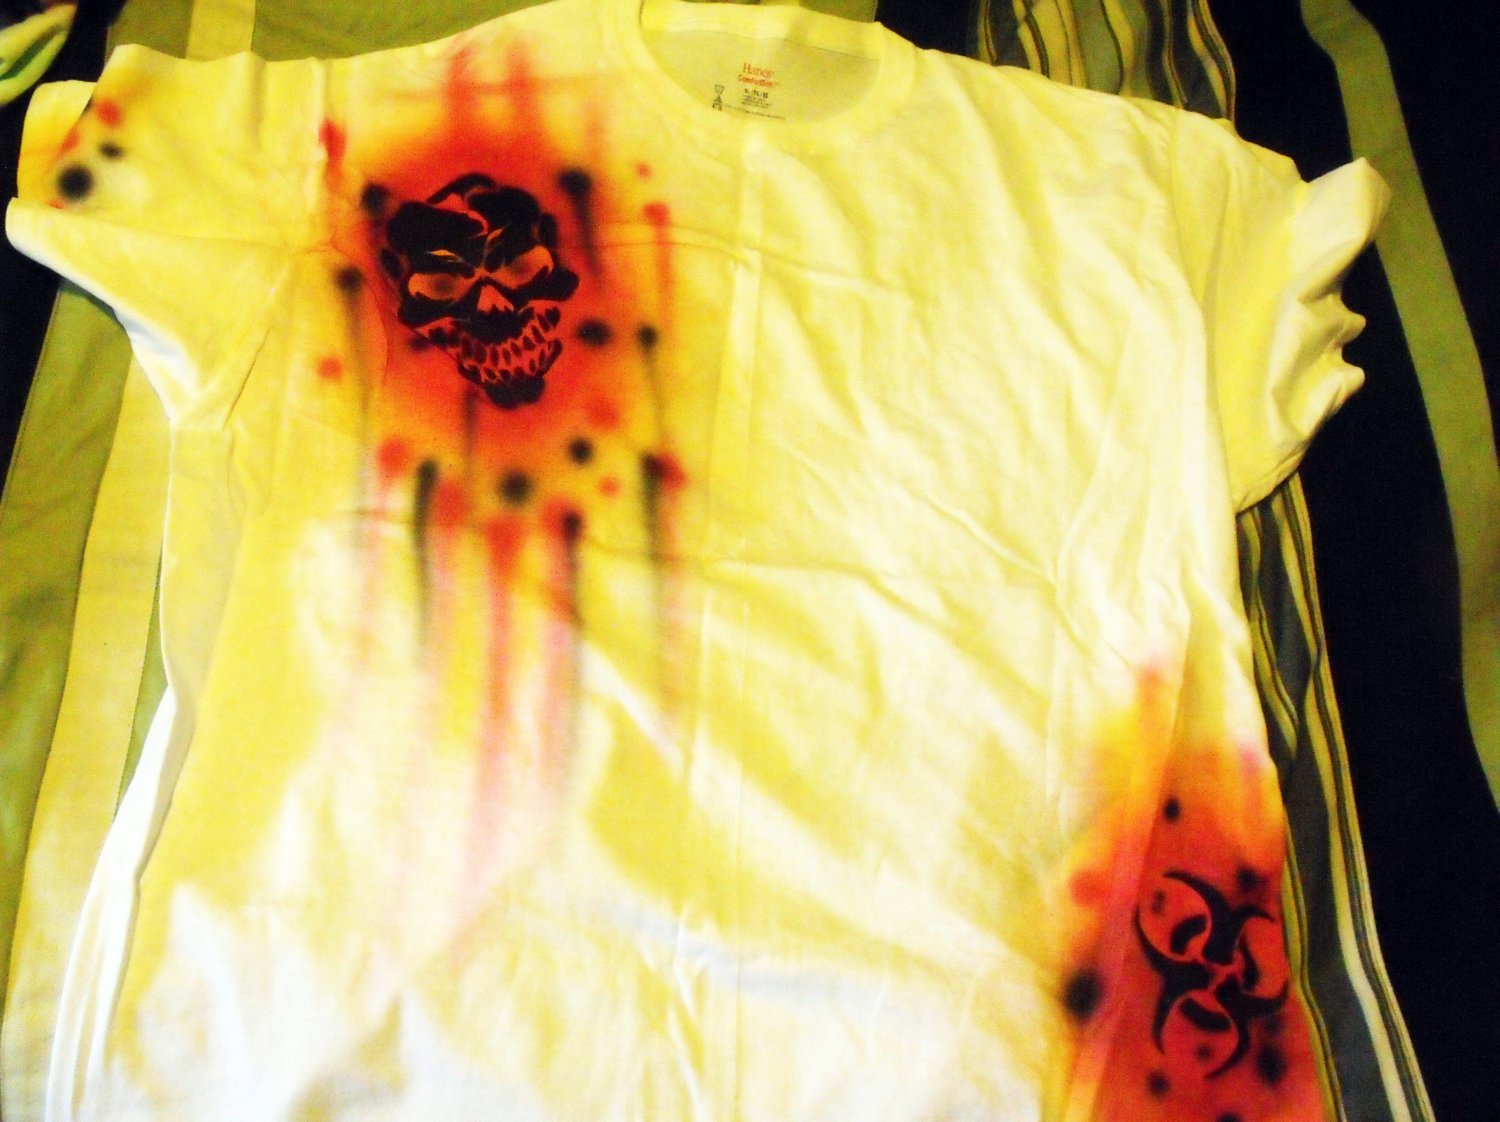 One of a kind XL air-brushed skull and biohazard T-shirt #2 - prewashed and new